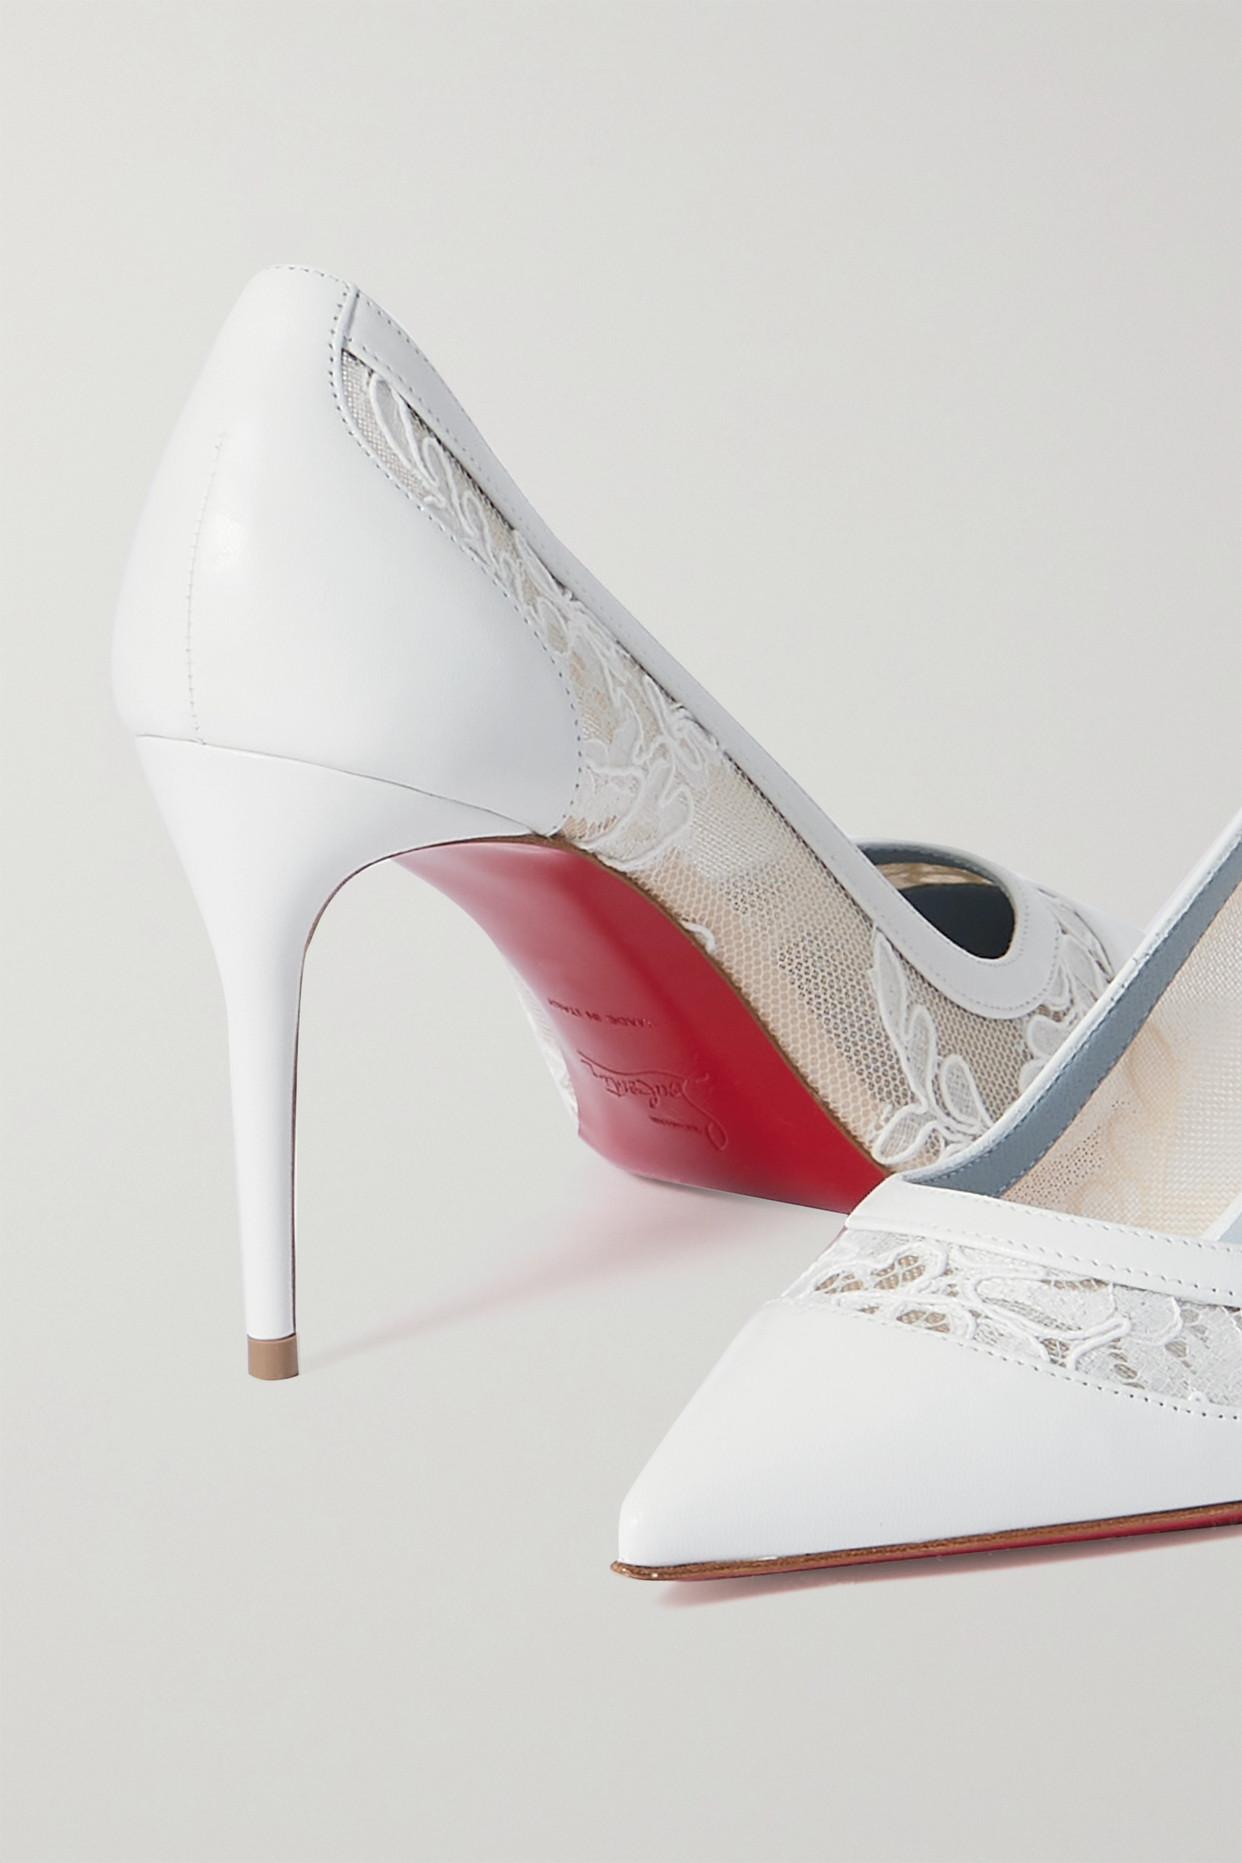 Where are Christian Louboutin shoes made? - Quora